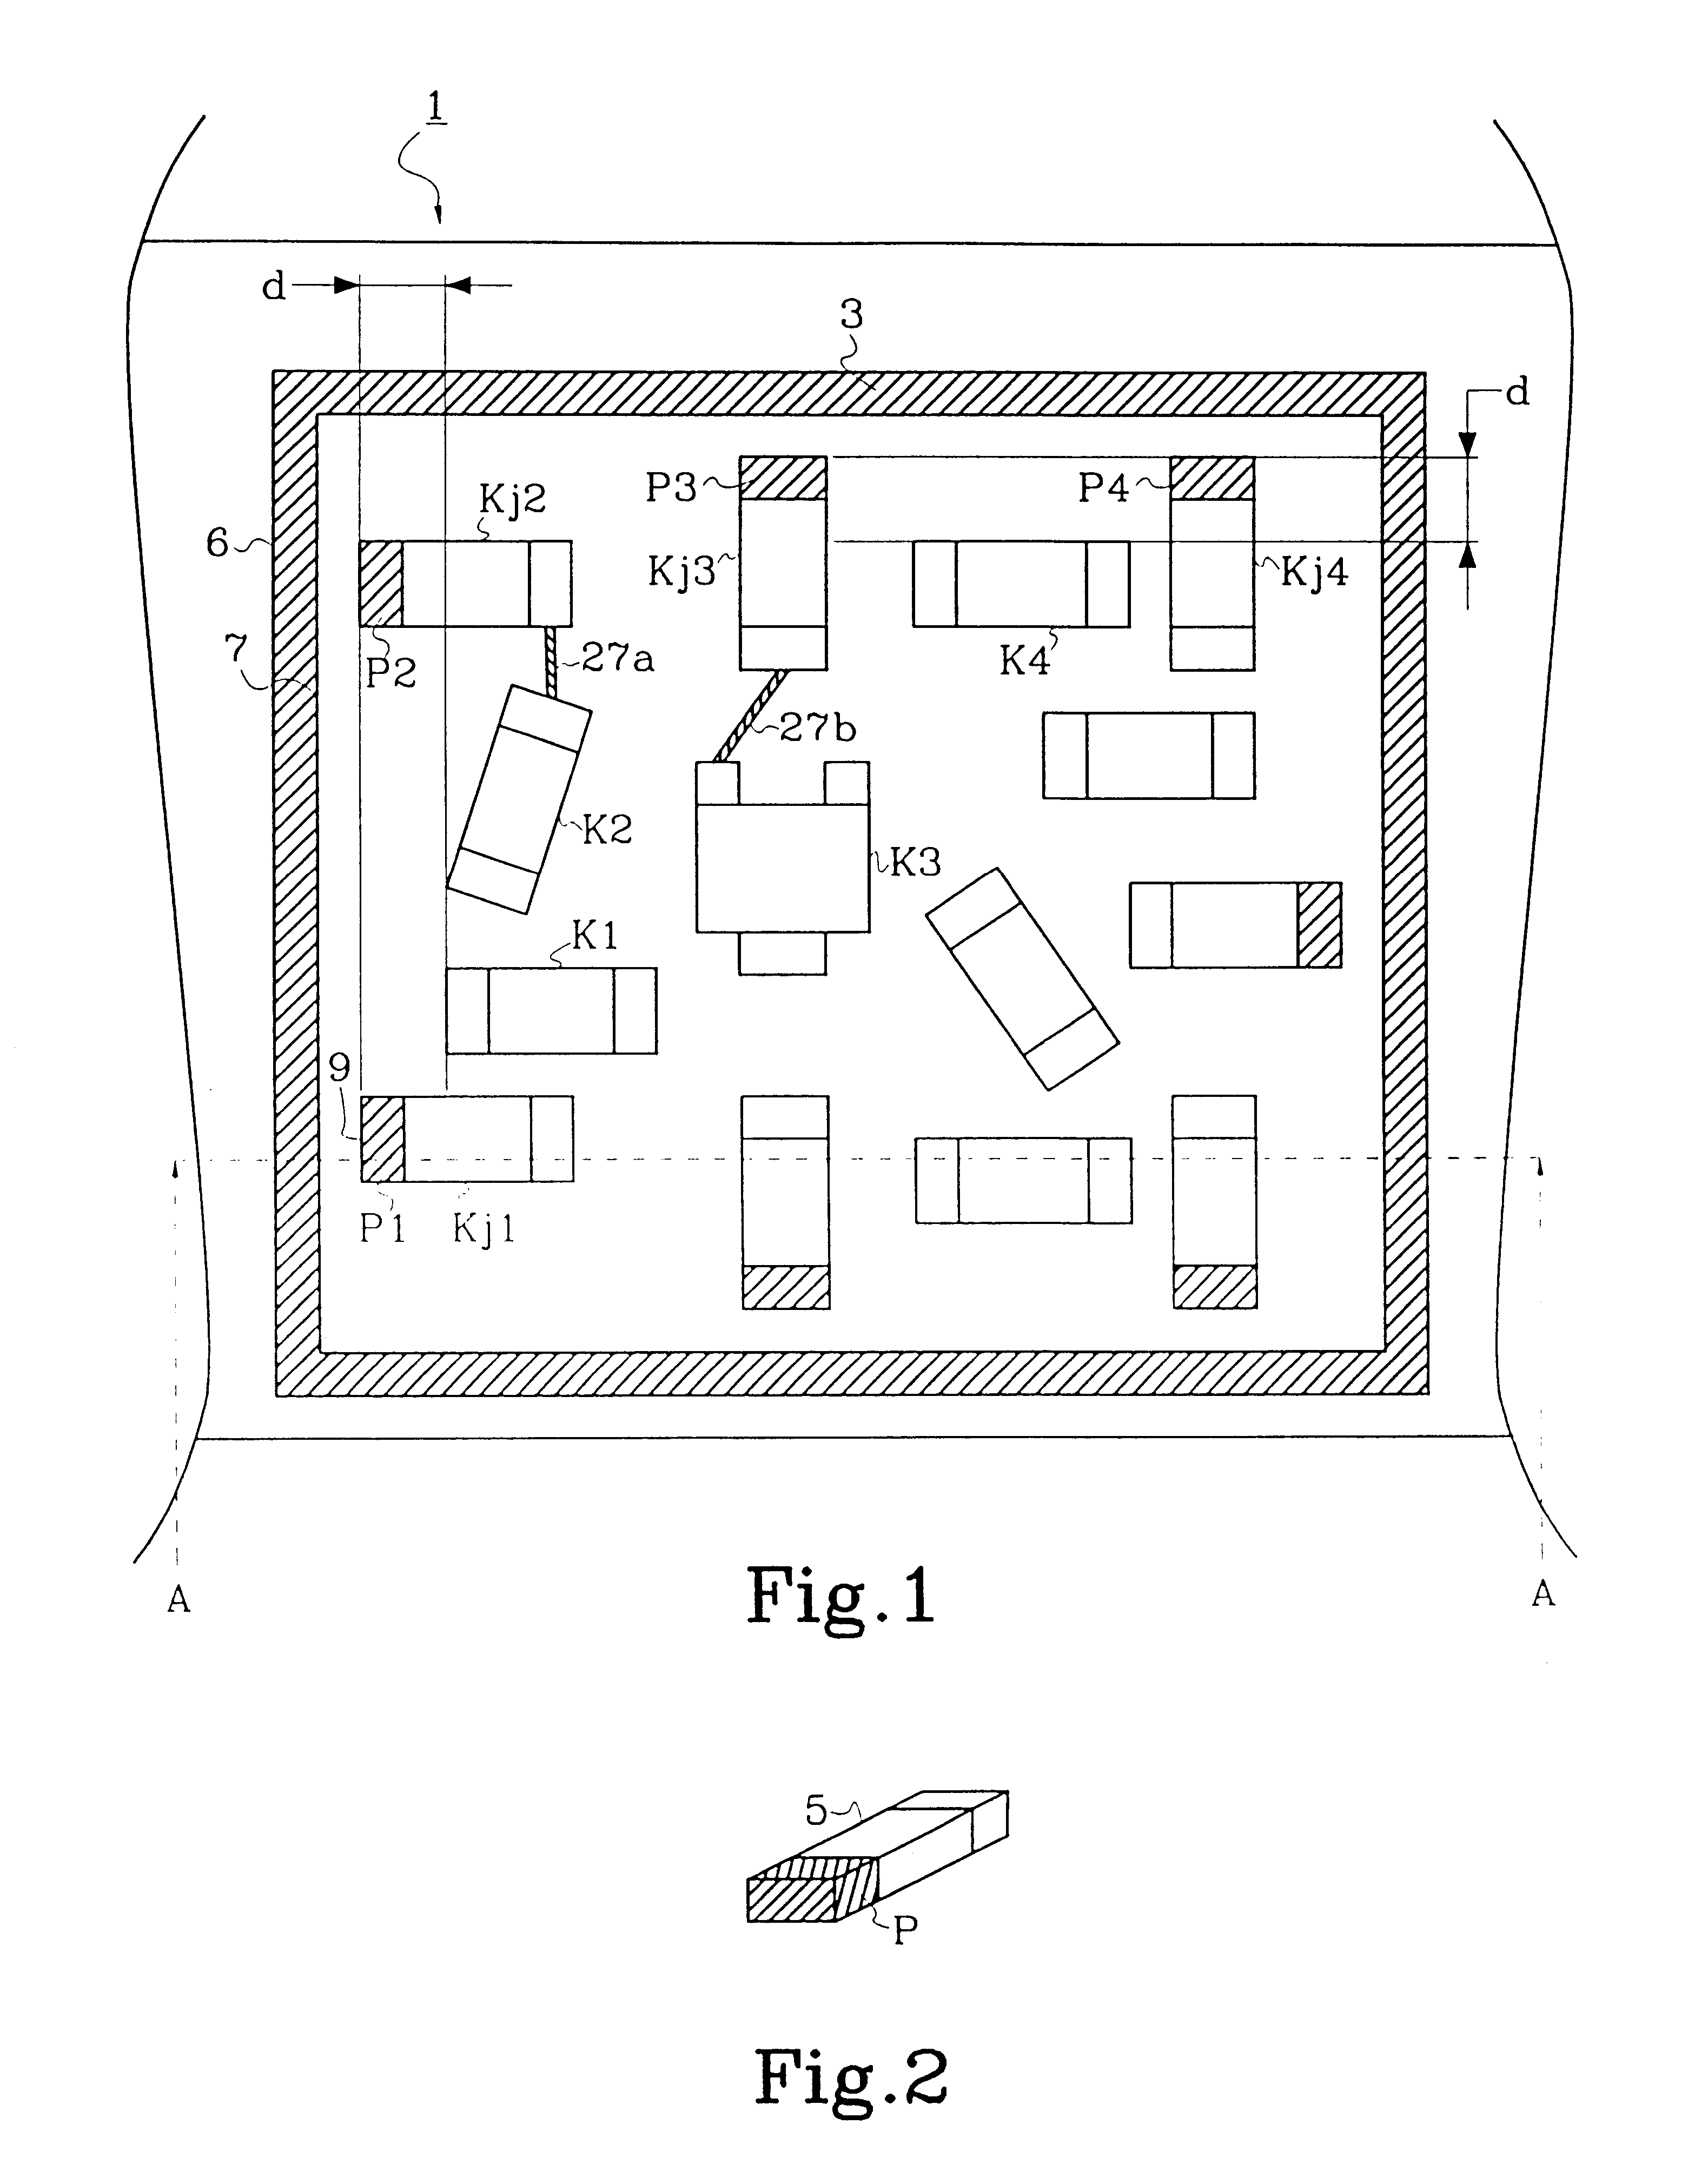 Method for shielding of electronics